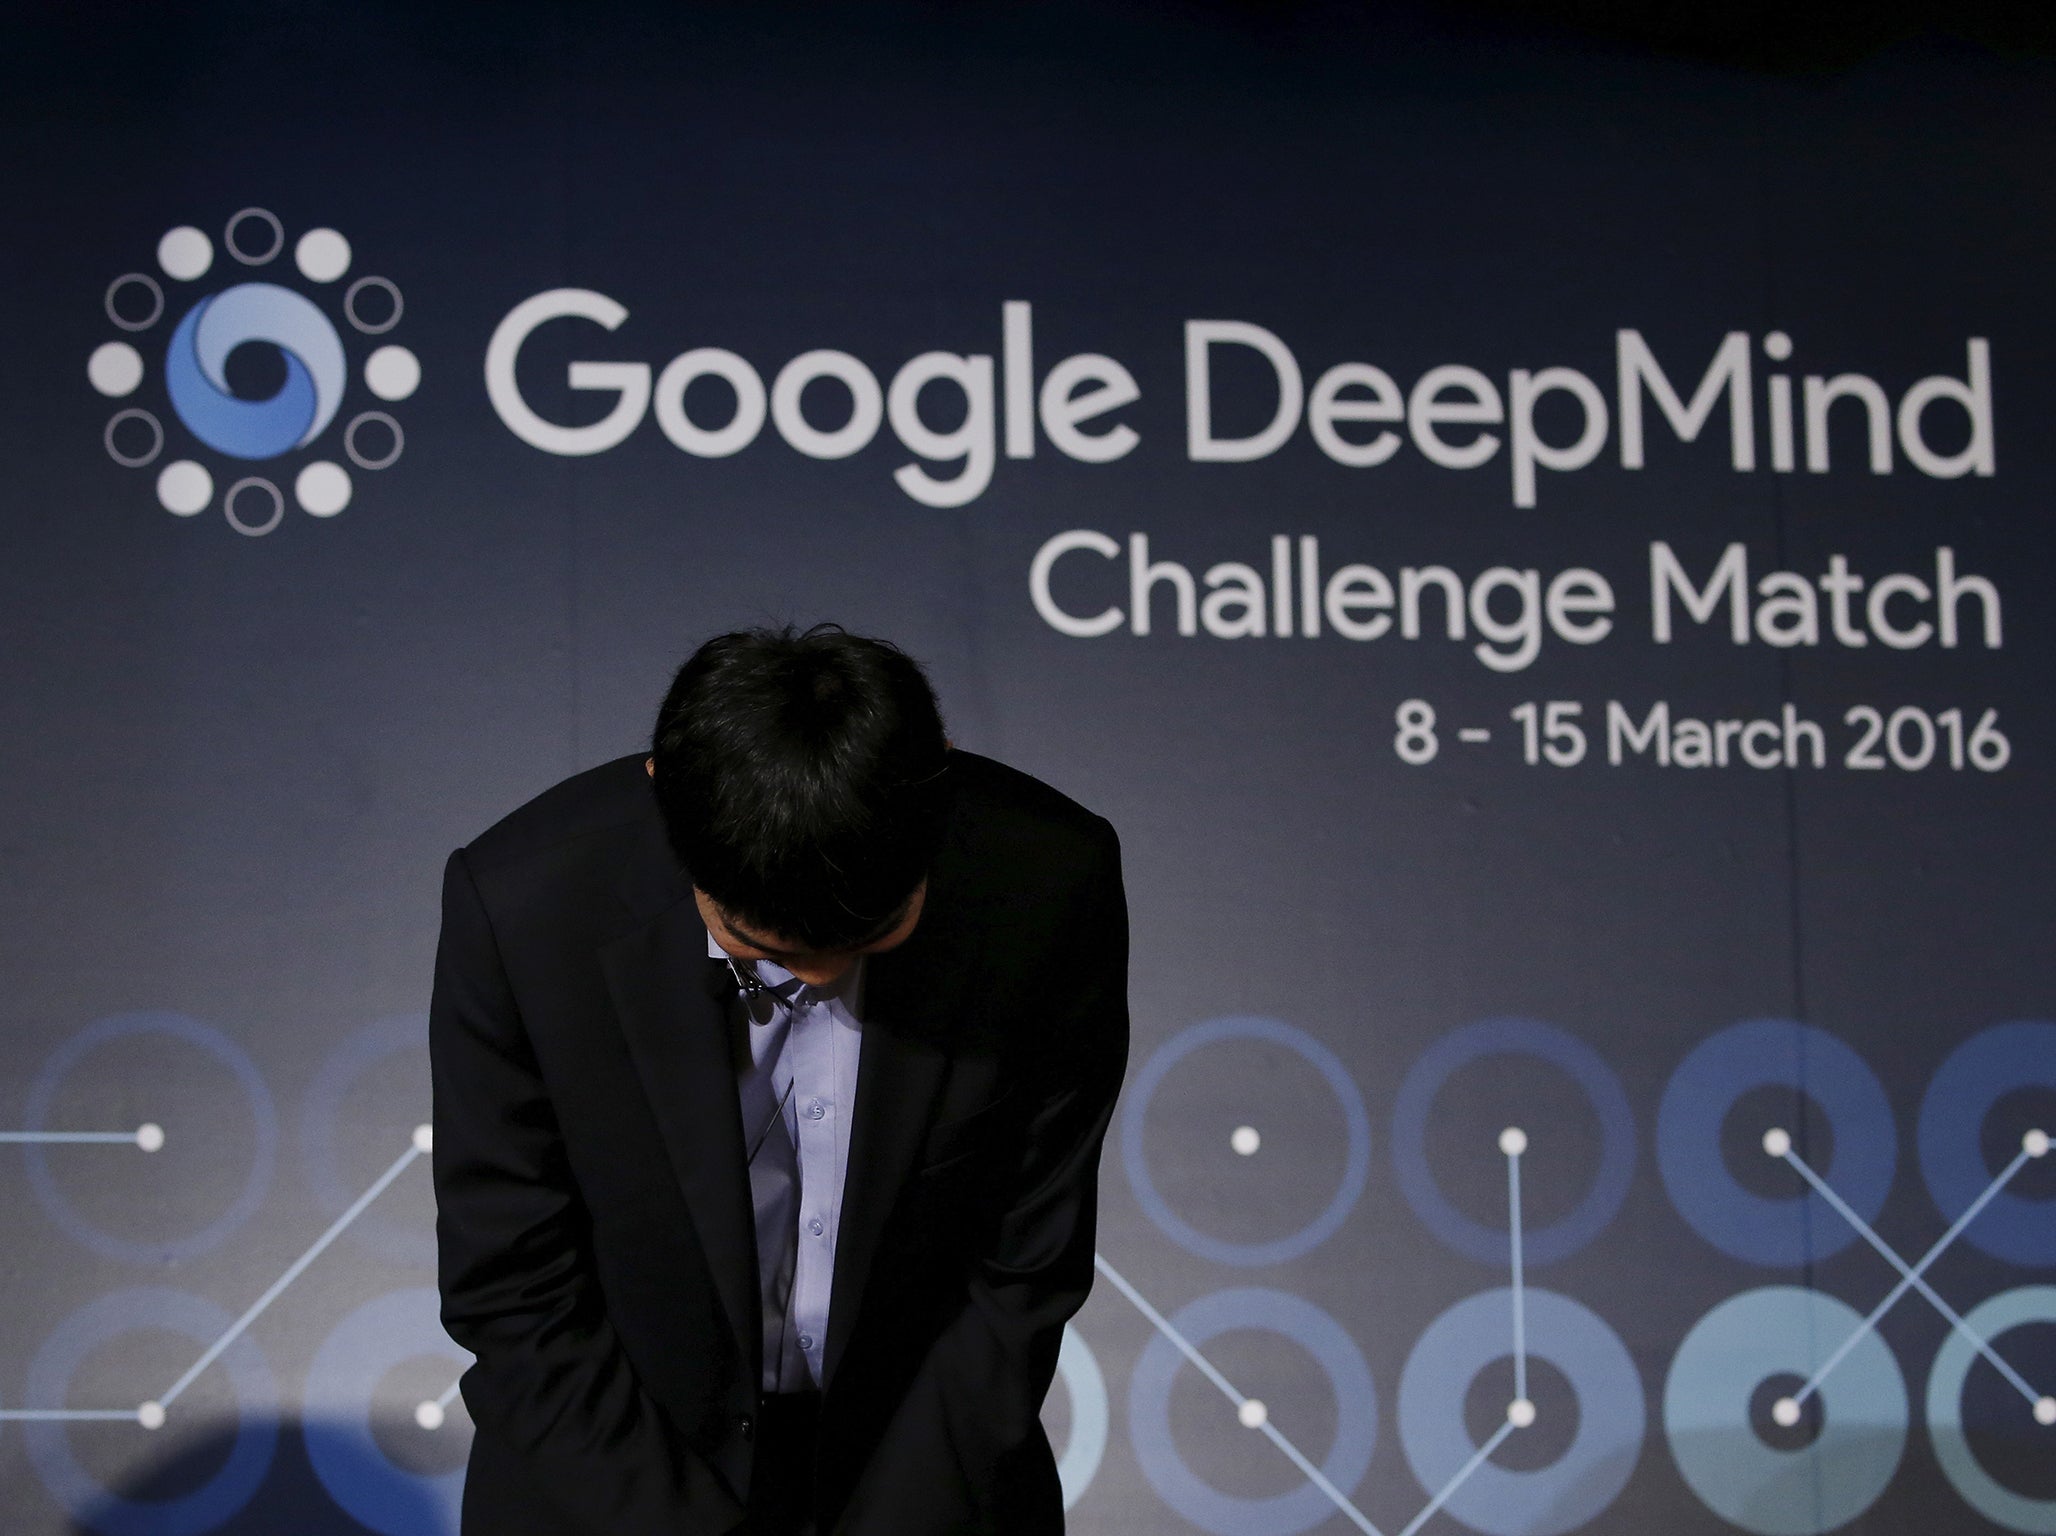 South Korea’s Lee Sedol, the world’s top Go player, bows during a news conference ahead of matches against Google’s artificial intelligence program AlphaGo, in Seoul, South Korea, March 8, 2016